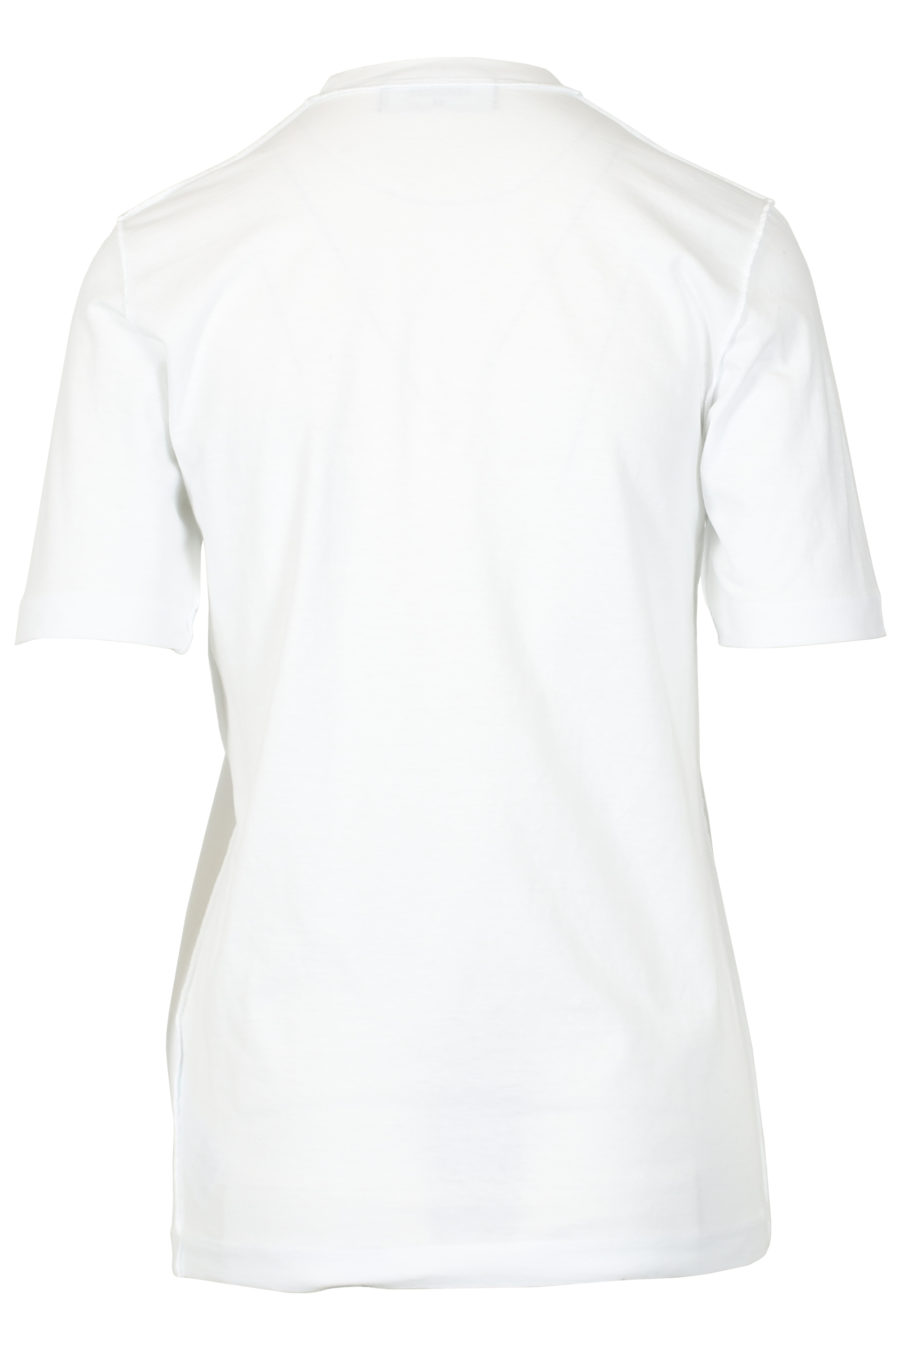 White short sleeve t-shirt with tiger - IMG 3271